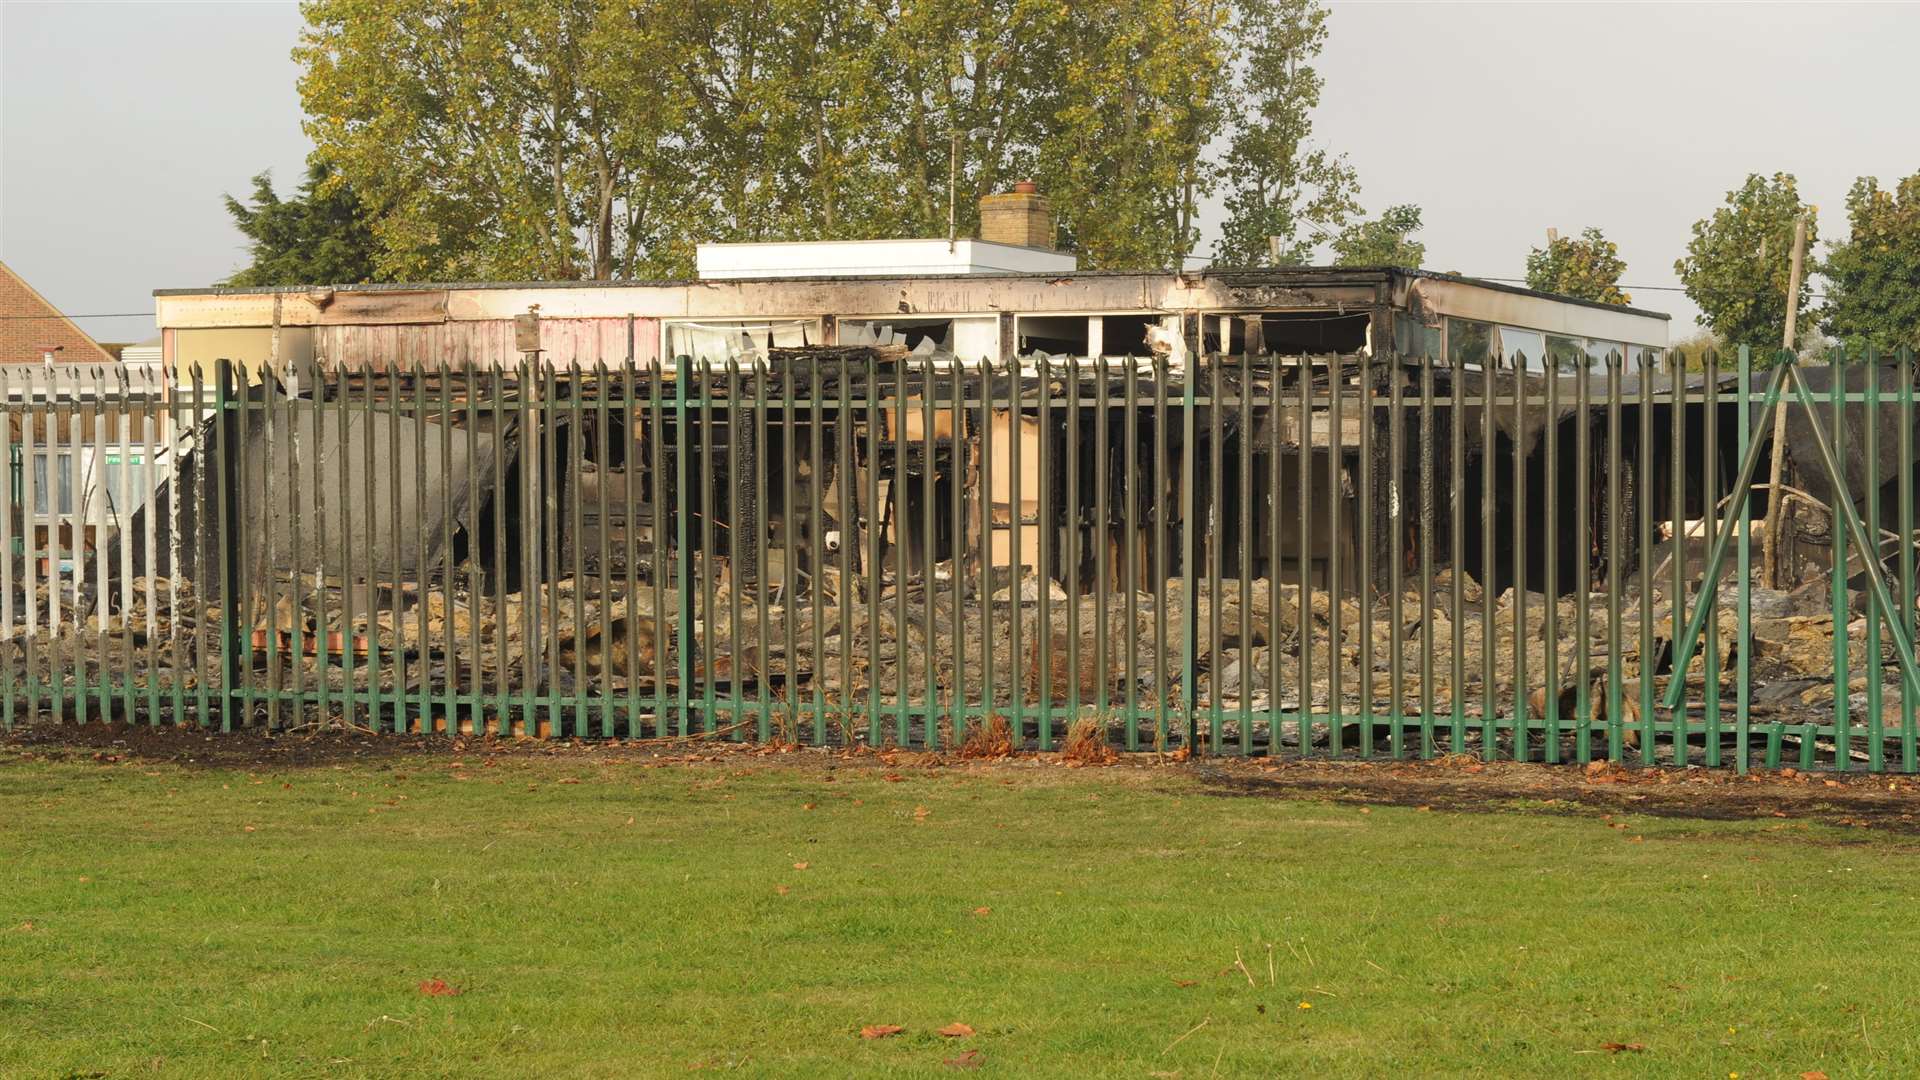 The aftermath of the fire at St James School in Grain.